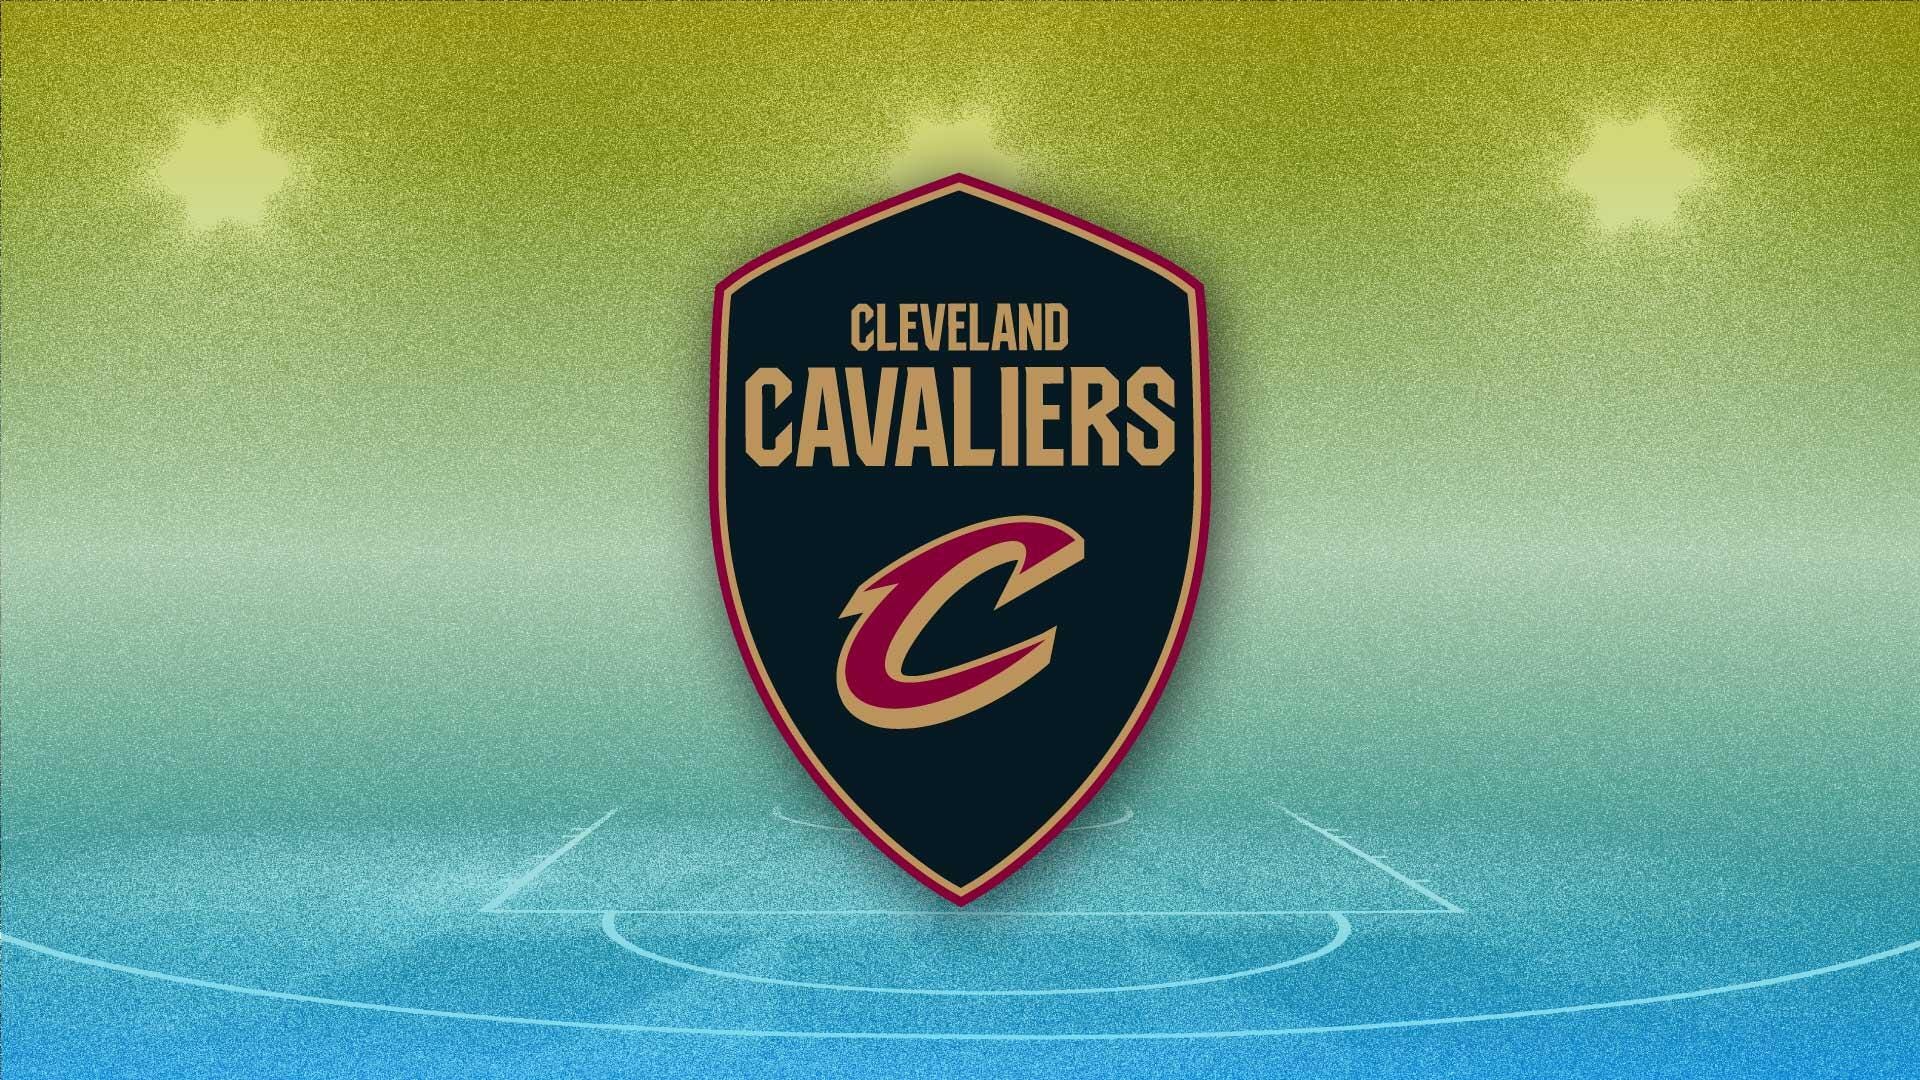 Right back at it tonight on NBA TV! - Cleveland Cavaliers